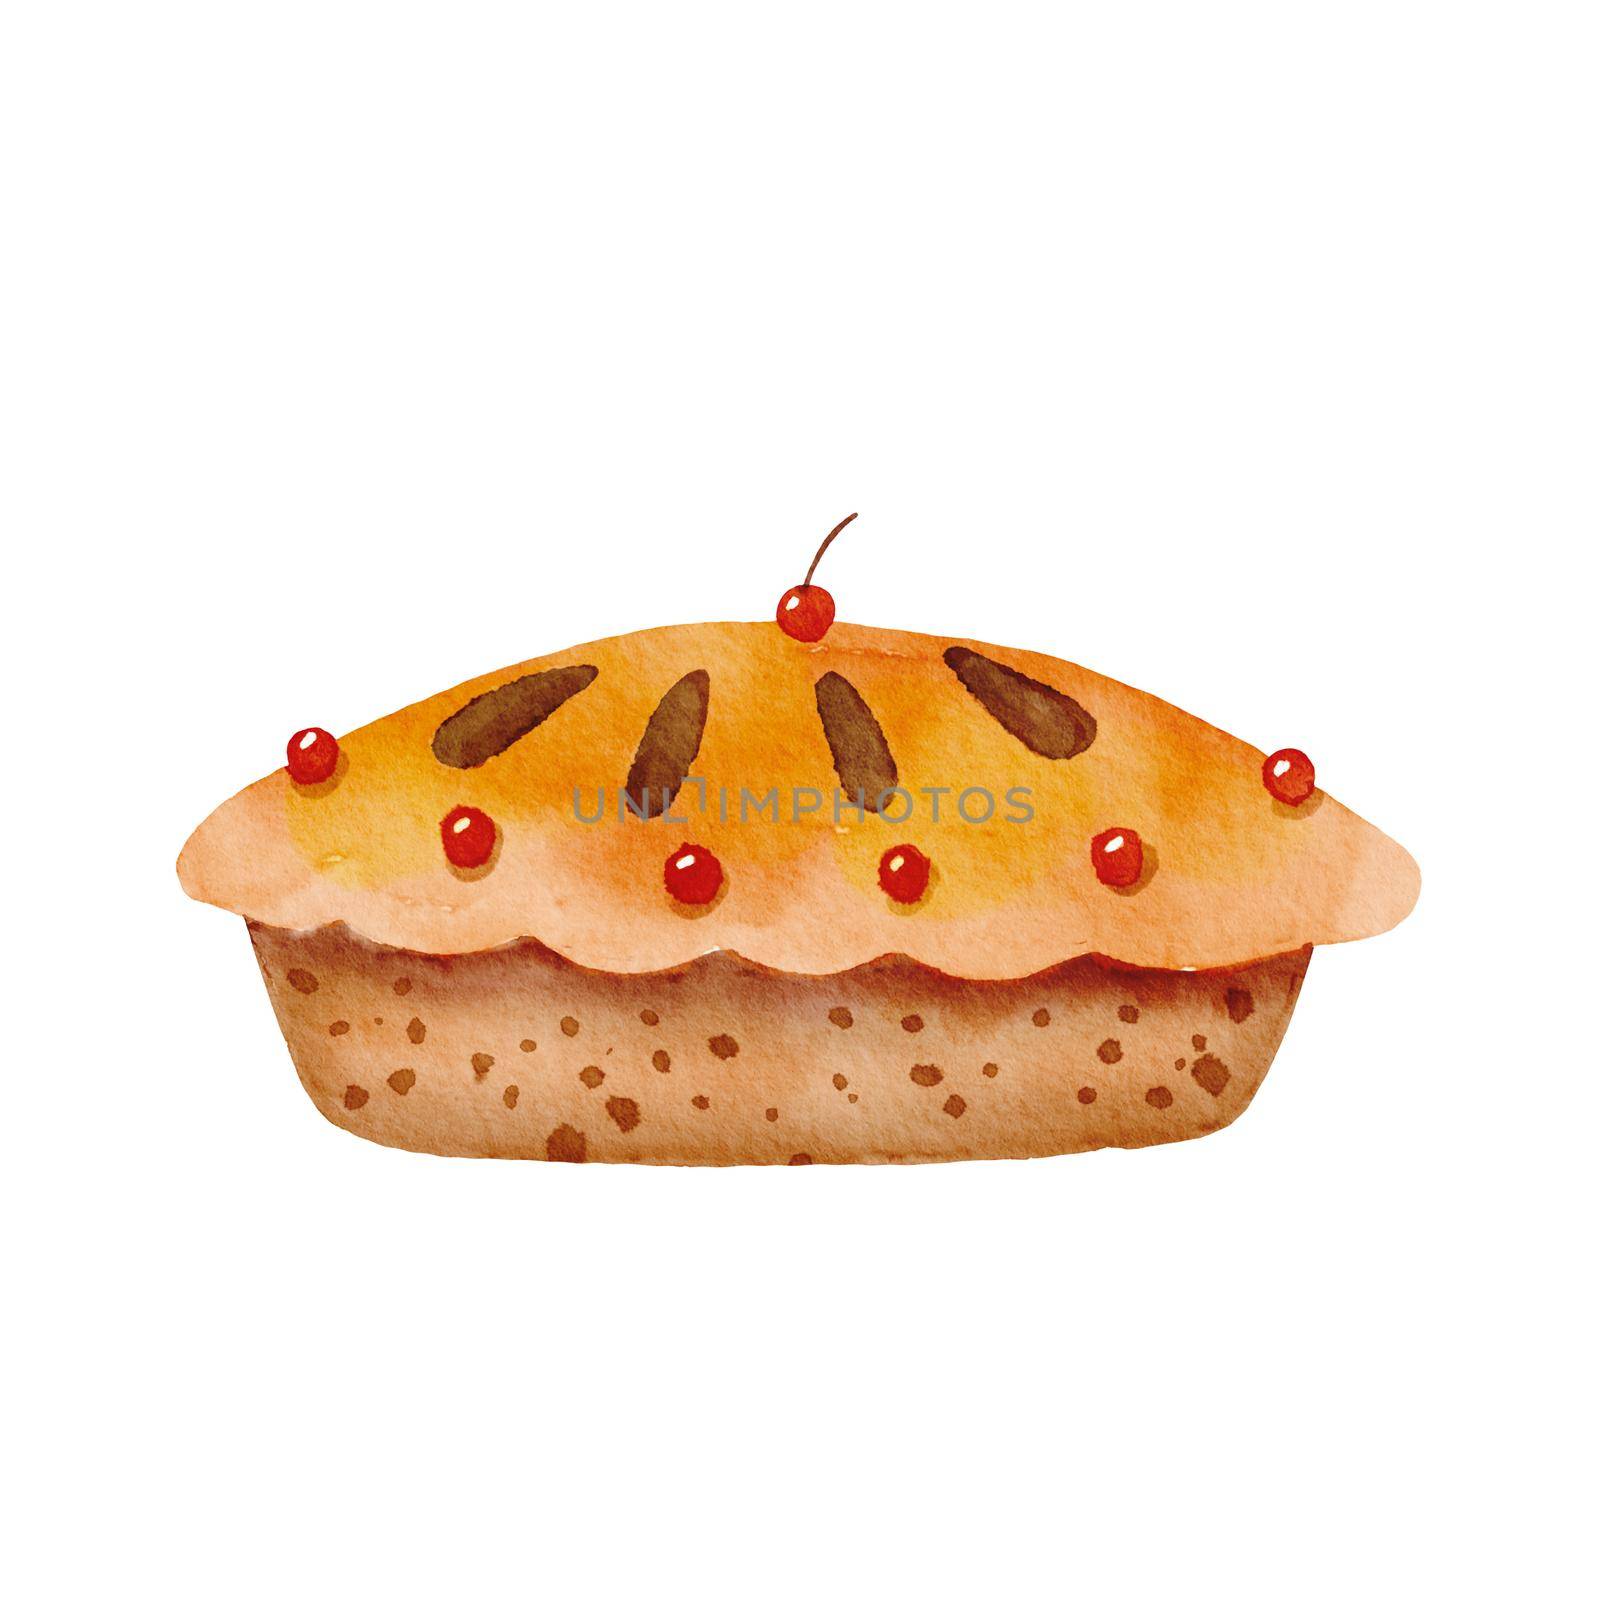 Watercolor thanksgiving pie. Cute bakery sweet. Childish illustration isolated on white background by ElenaPlatova